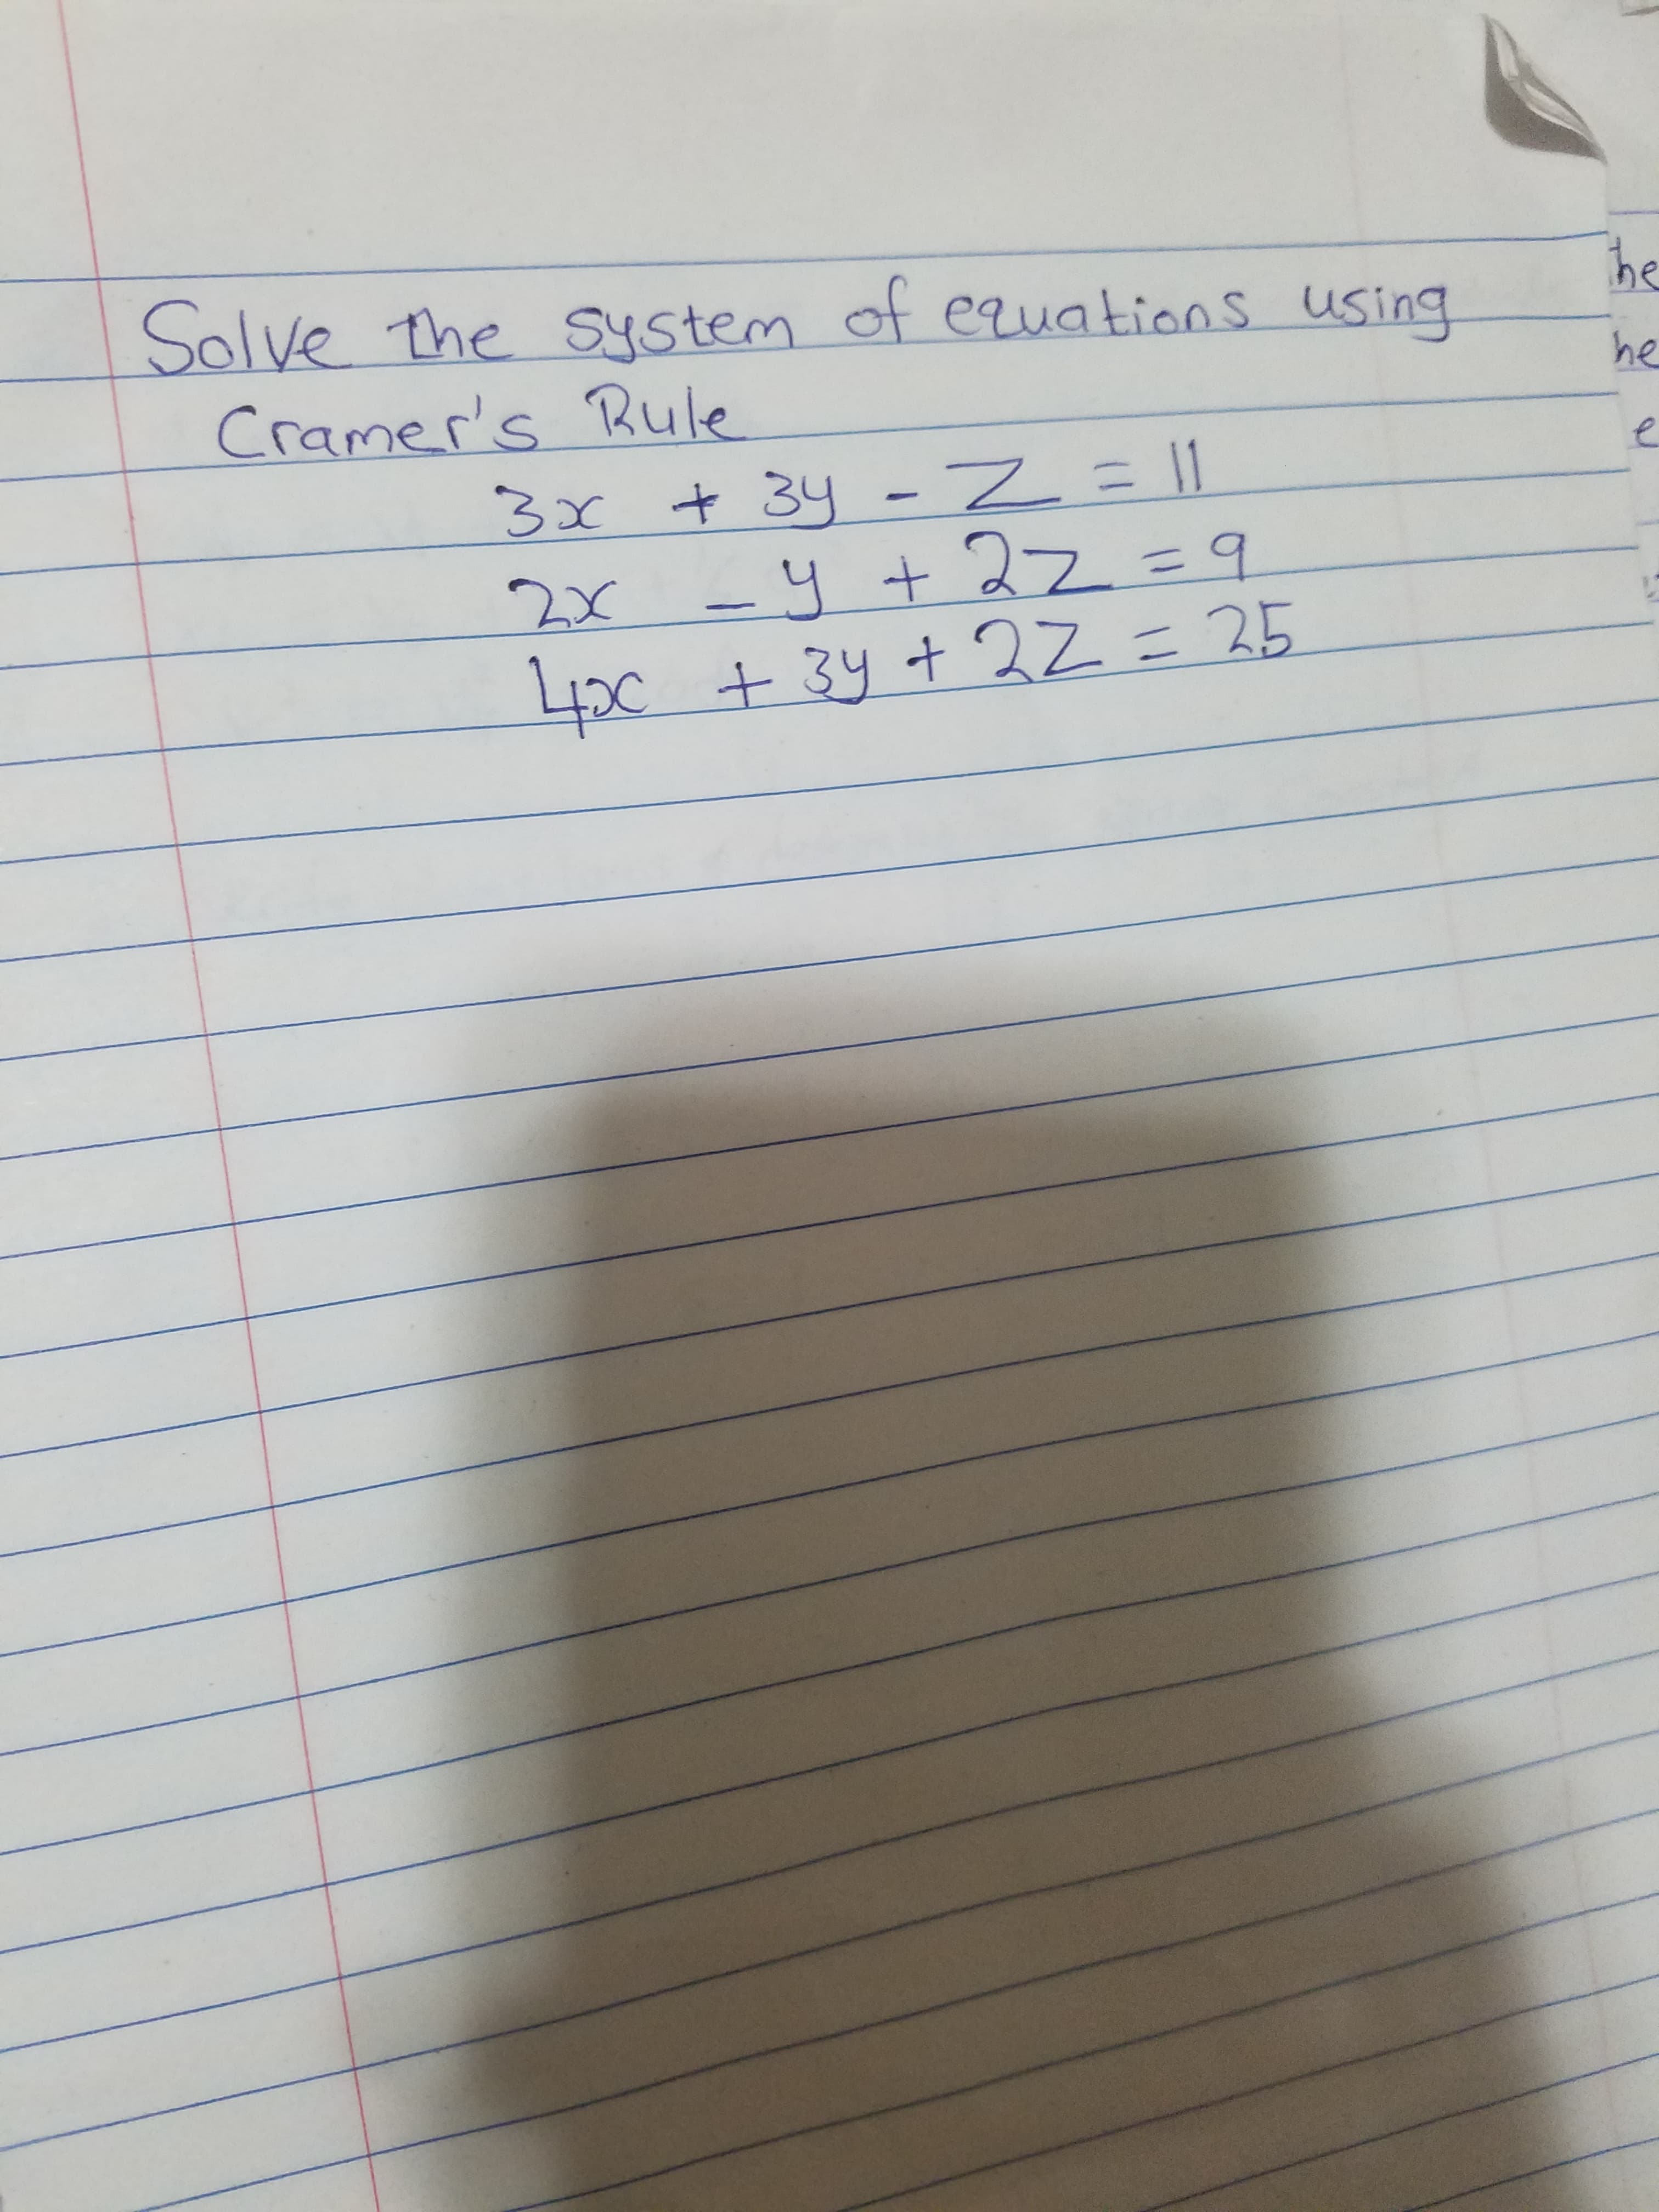 Solve the System of euations using
Cramer's Rule
3x + 34 - Z l
2x _y+ 22=9
|
4C 2=25
+34 +2Z
